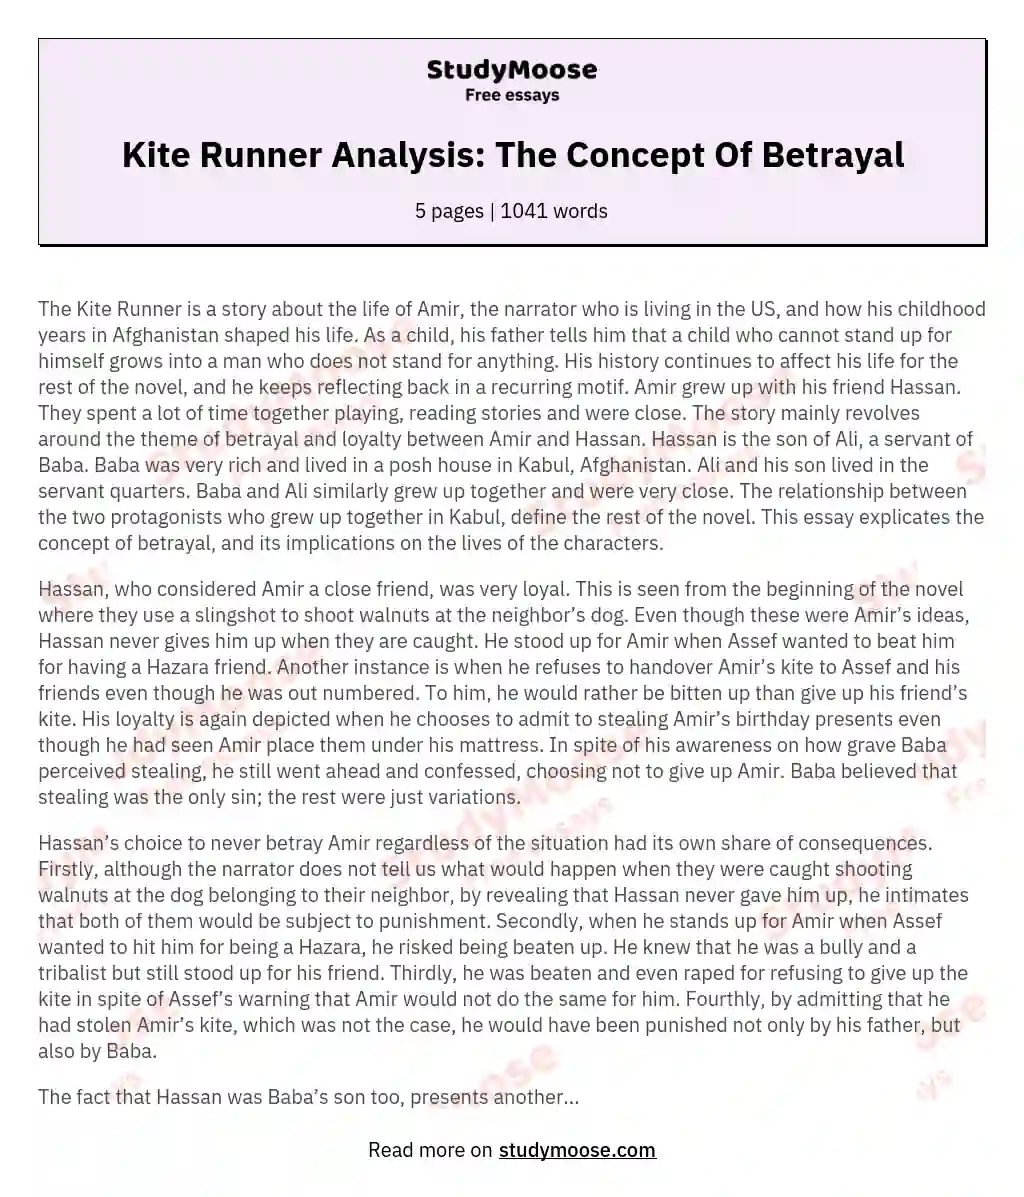 Kite Runner Analysis: The Concept Of Betrayal essay